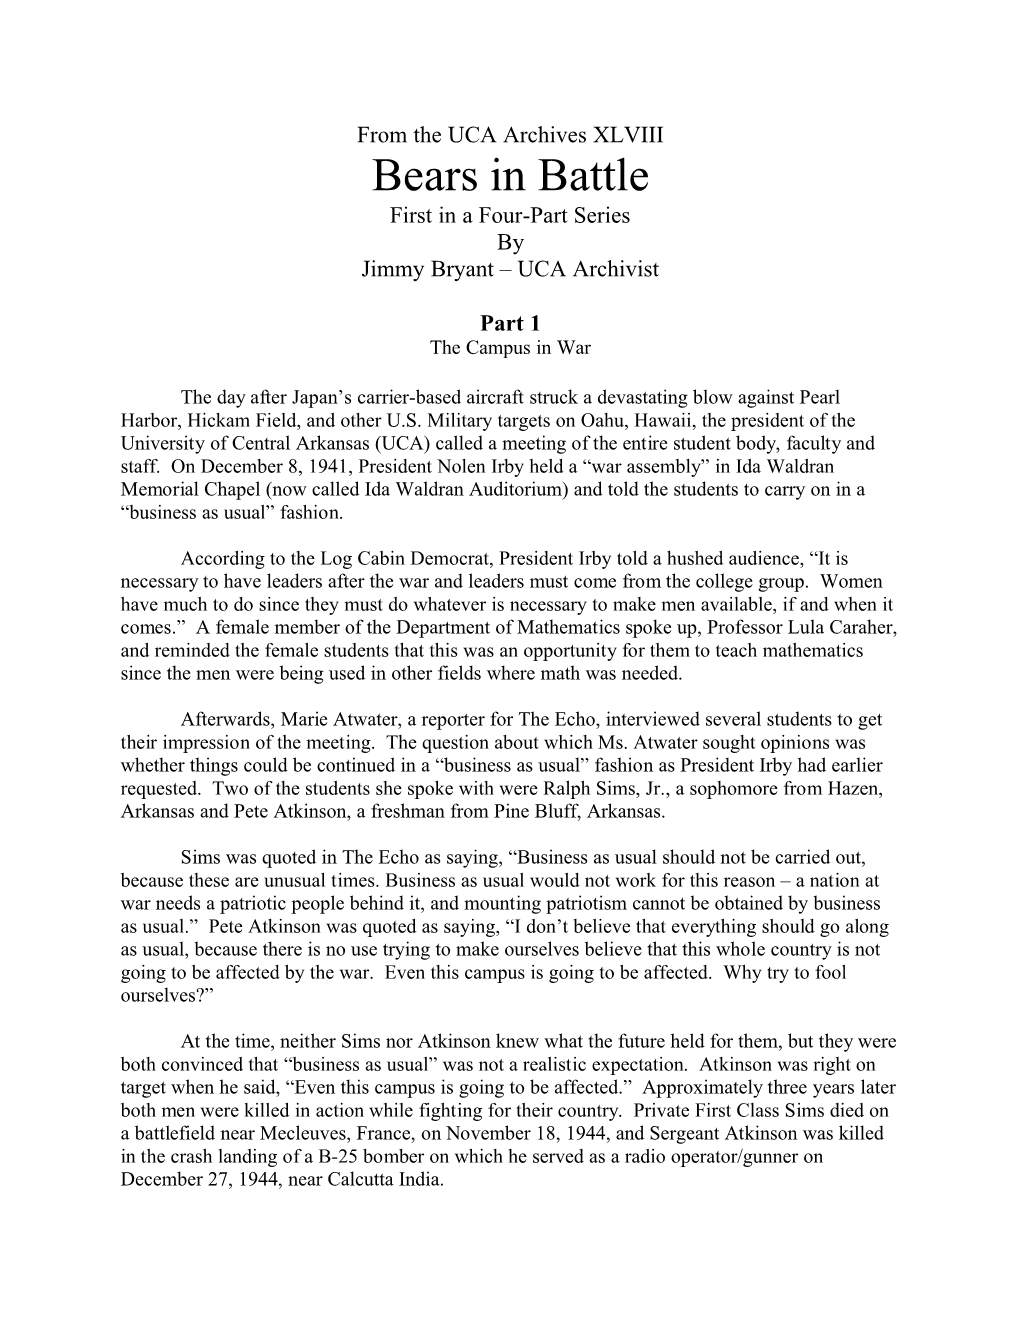 From the UCA Archives XLVIII Bears in Battle First in a Four-Part Series by Jimmy Bryant – UCA Archivist